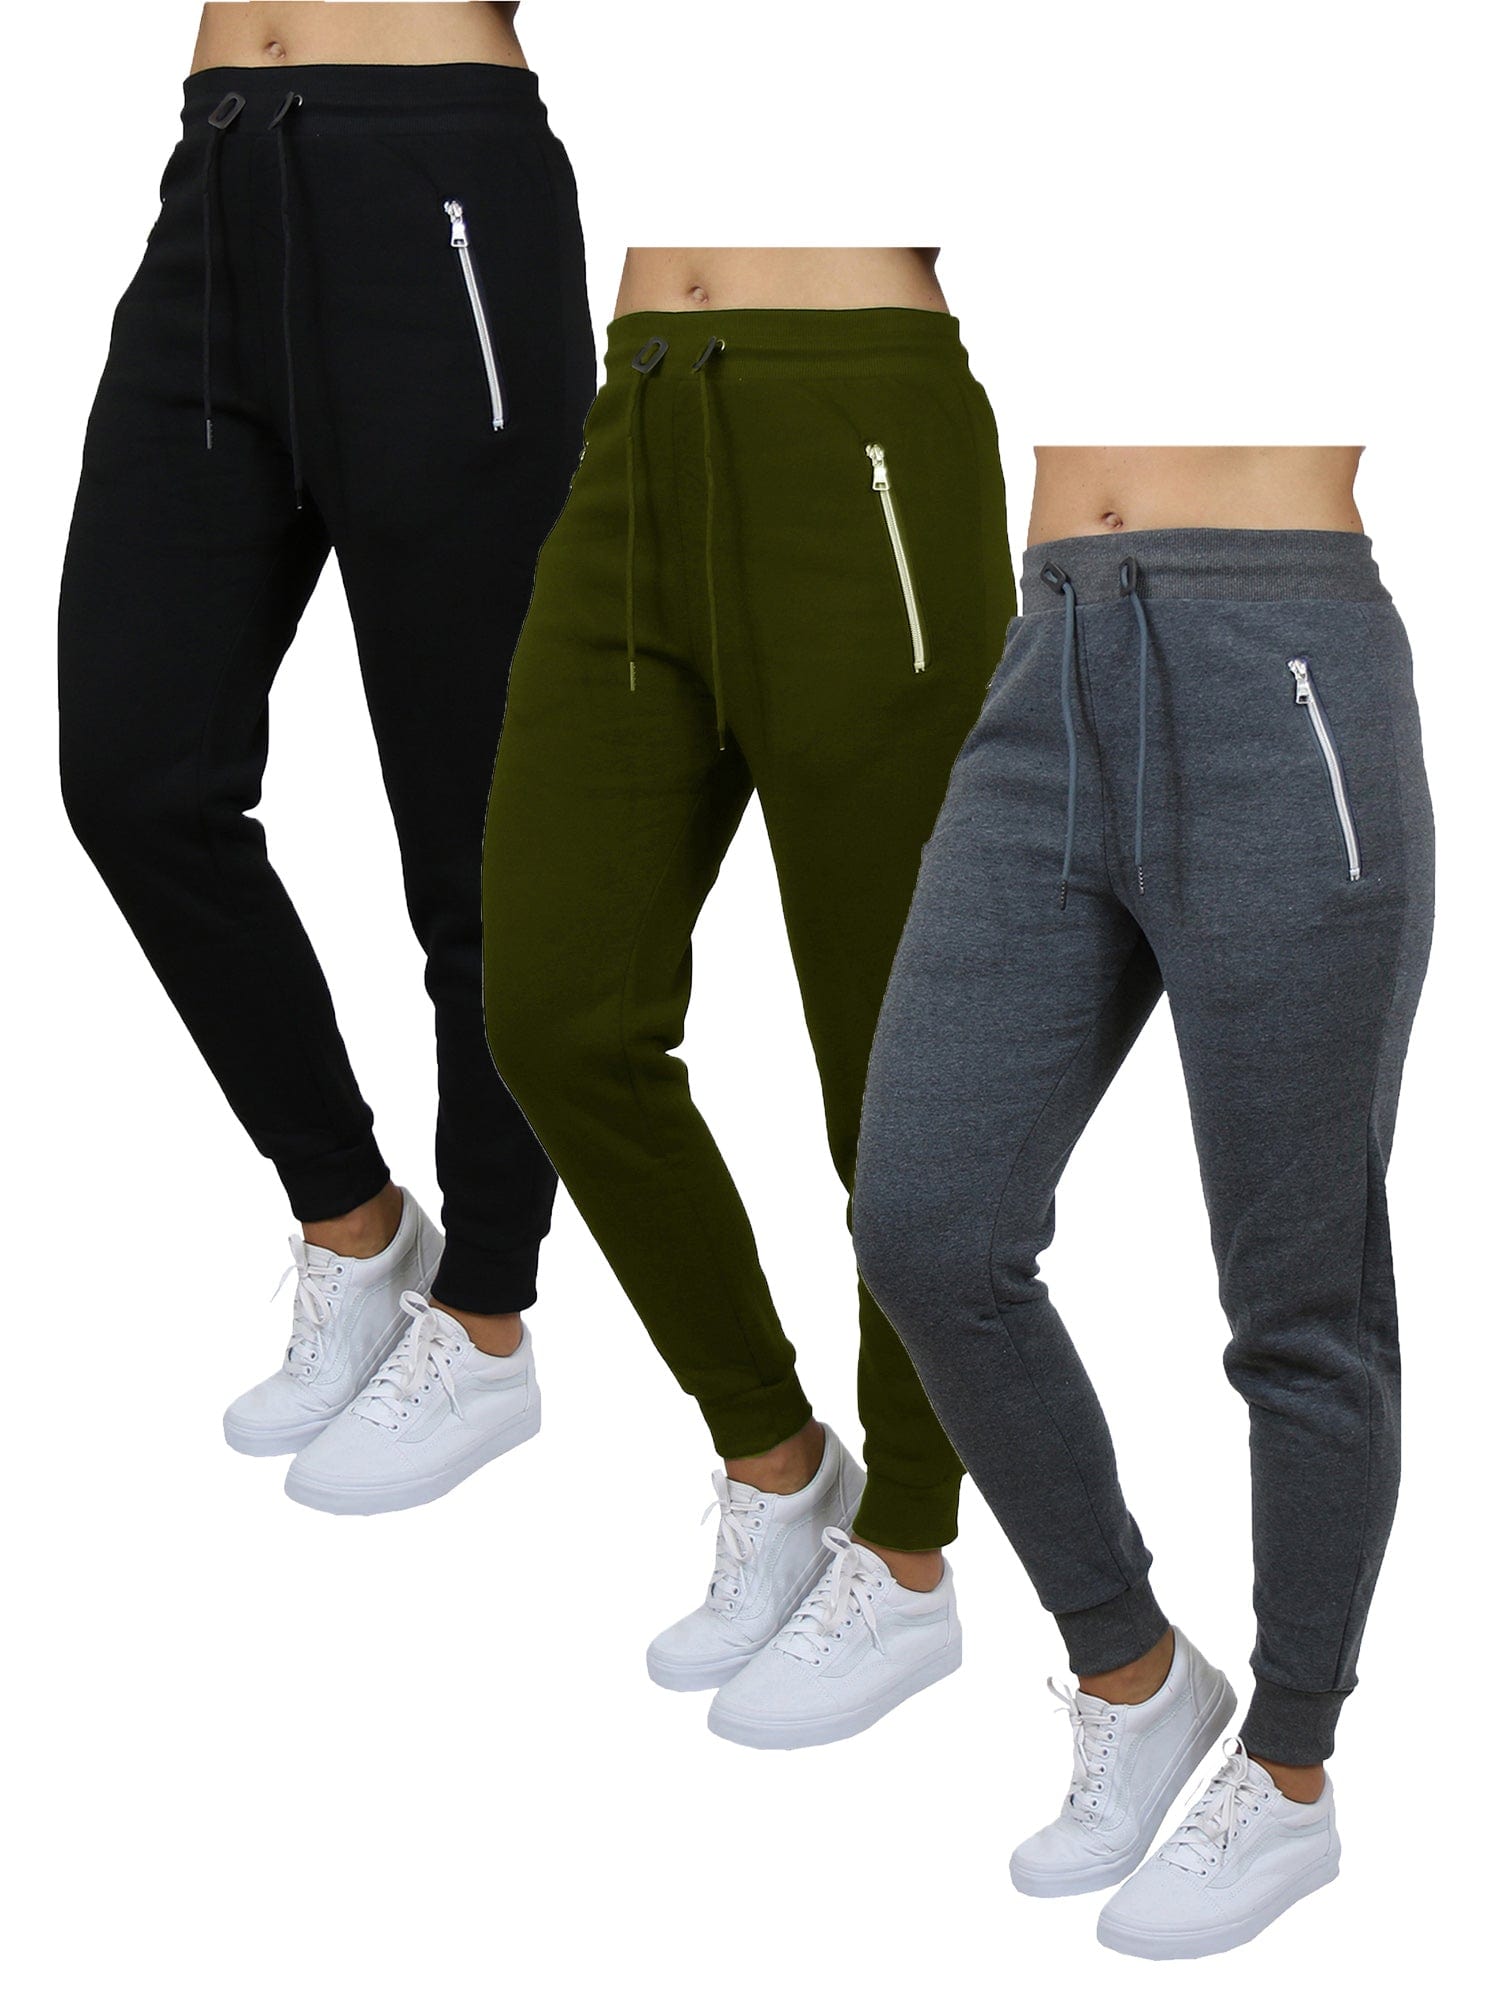 Buy Women's Sweatpants Workout Athletic Jogger Pants with Pocket